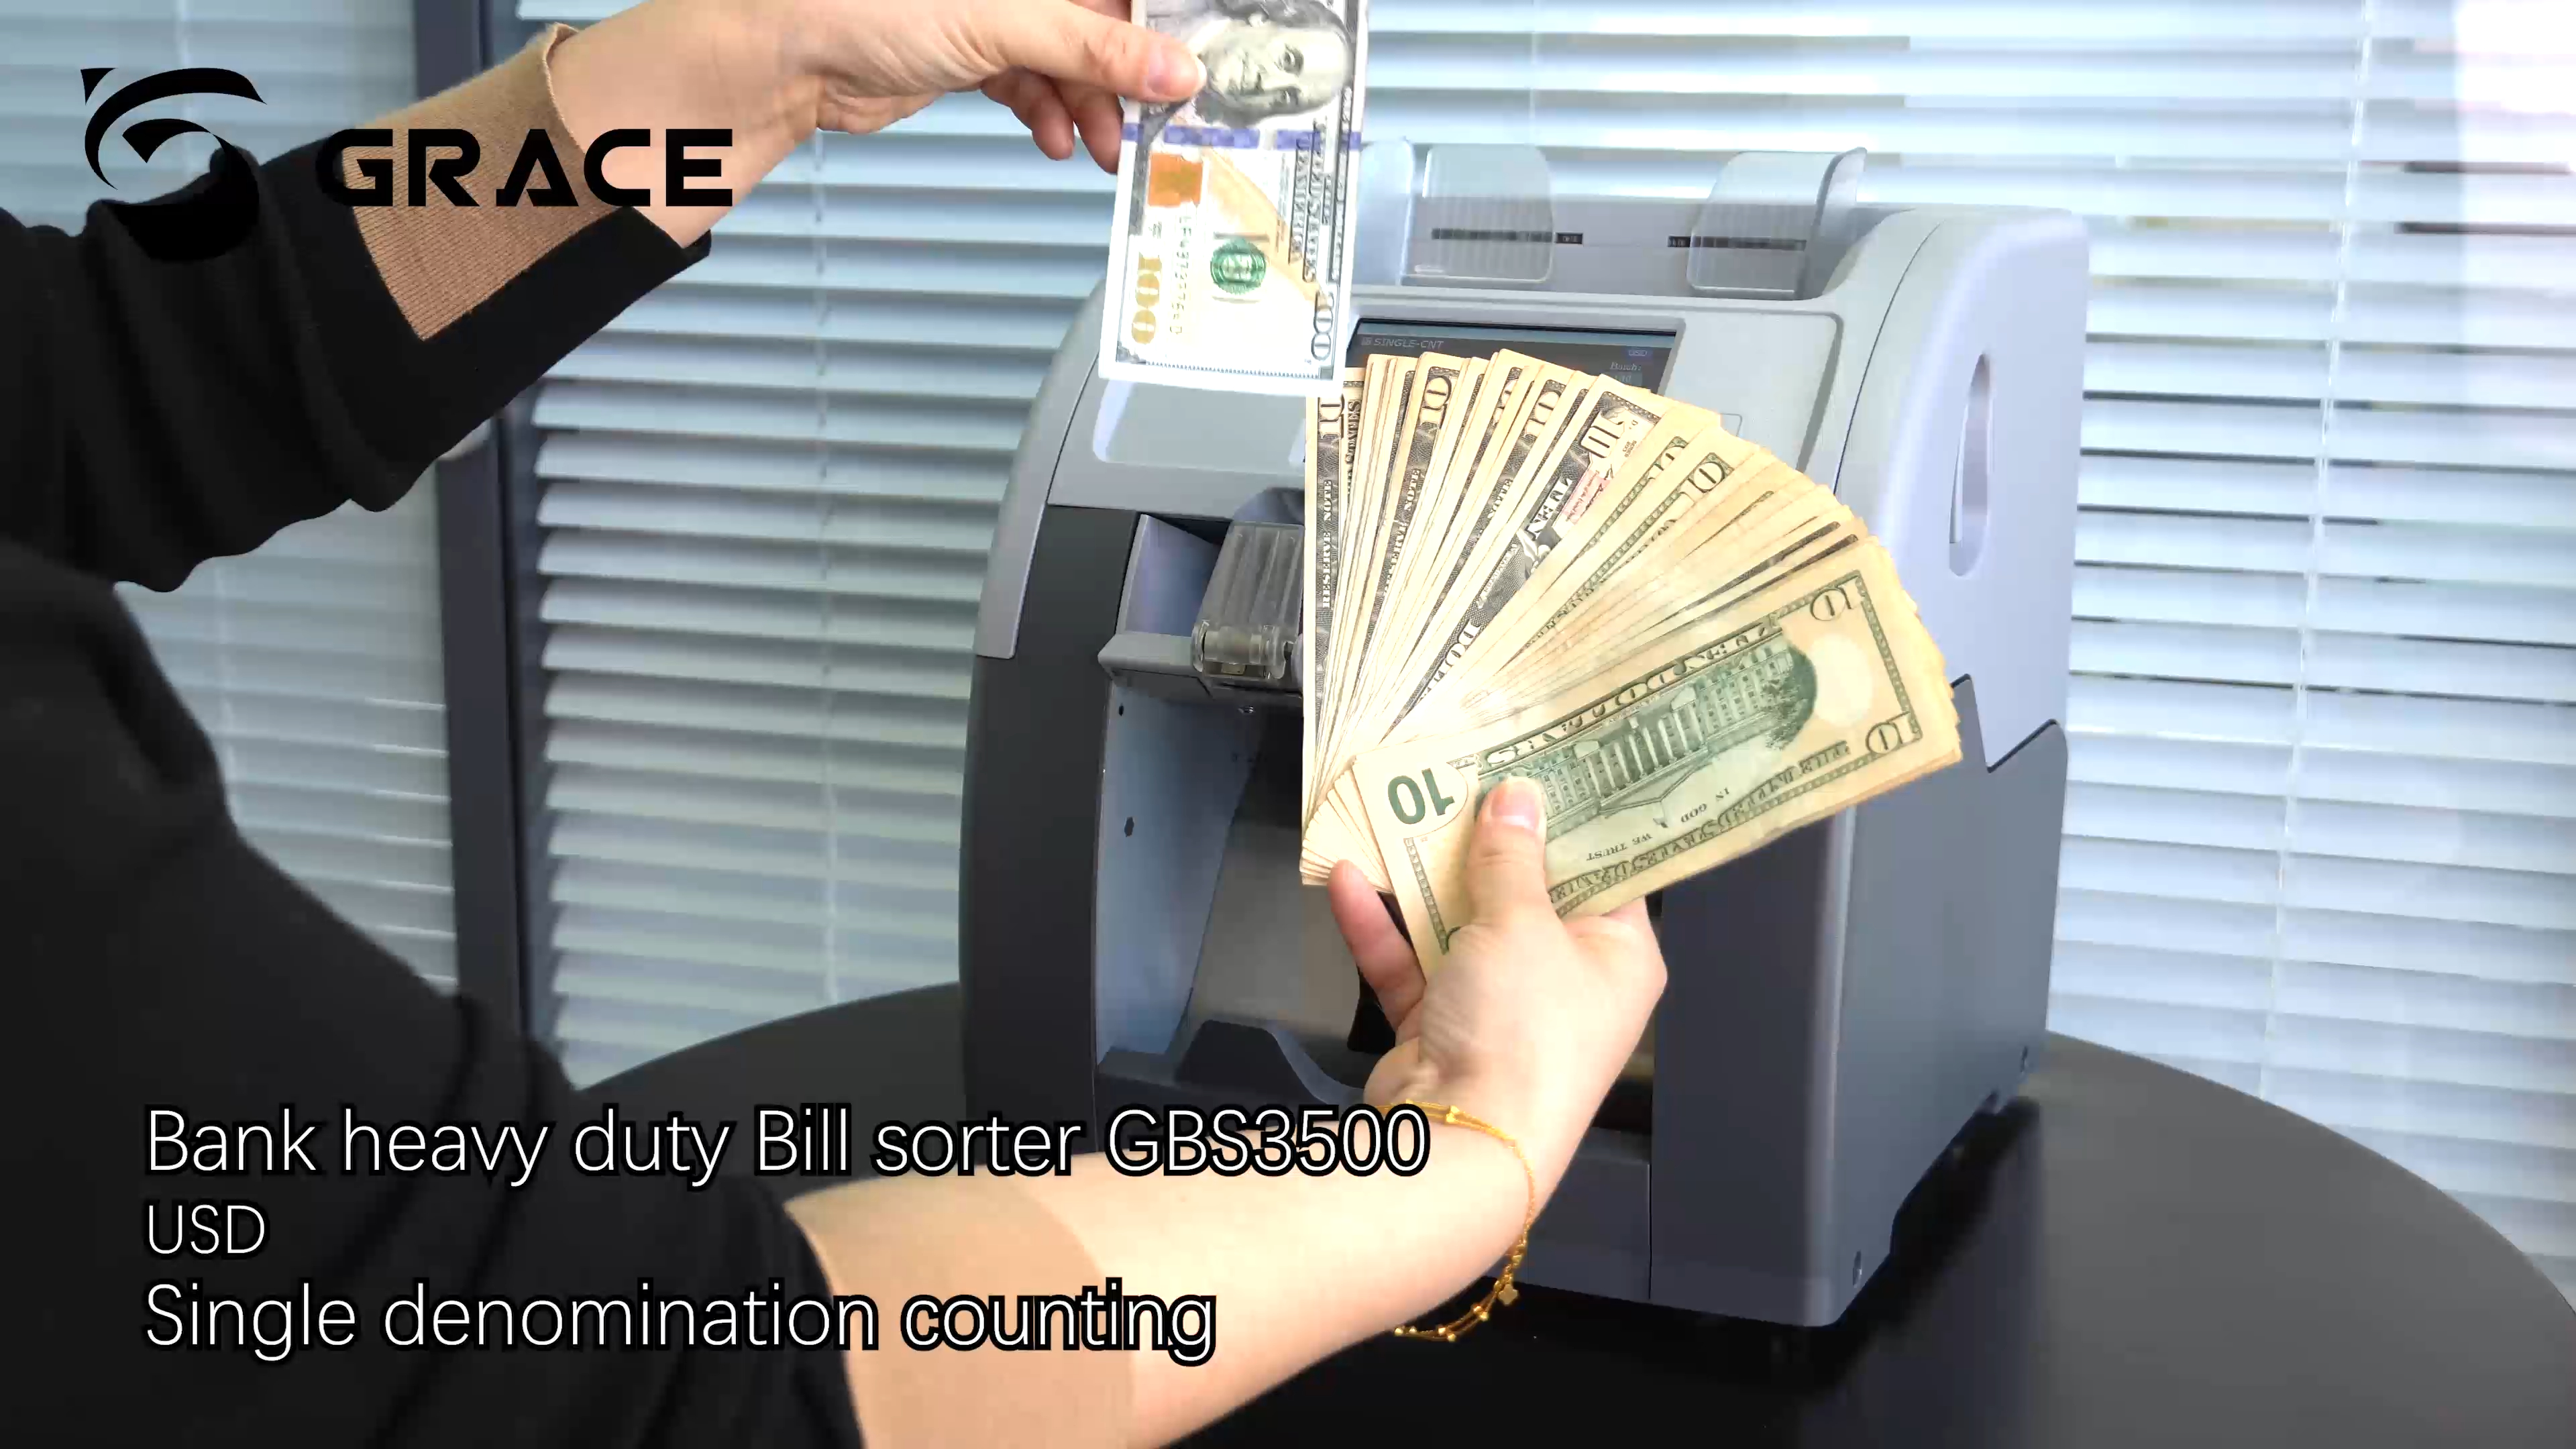 USD-GBS3500 SDC Single currency counting